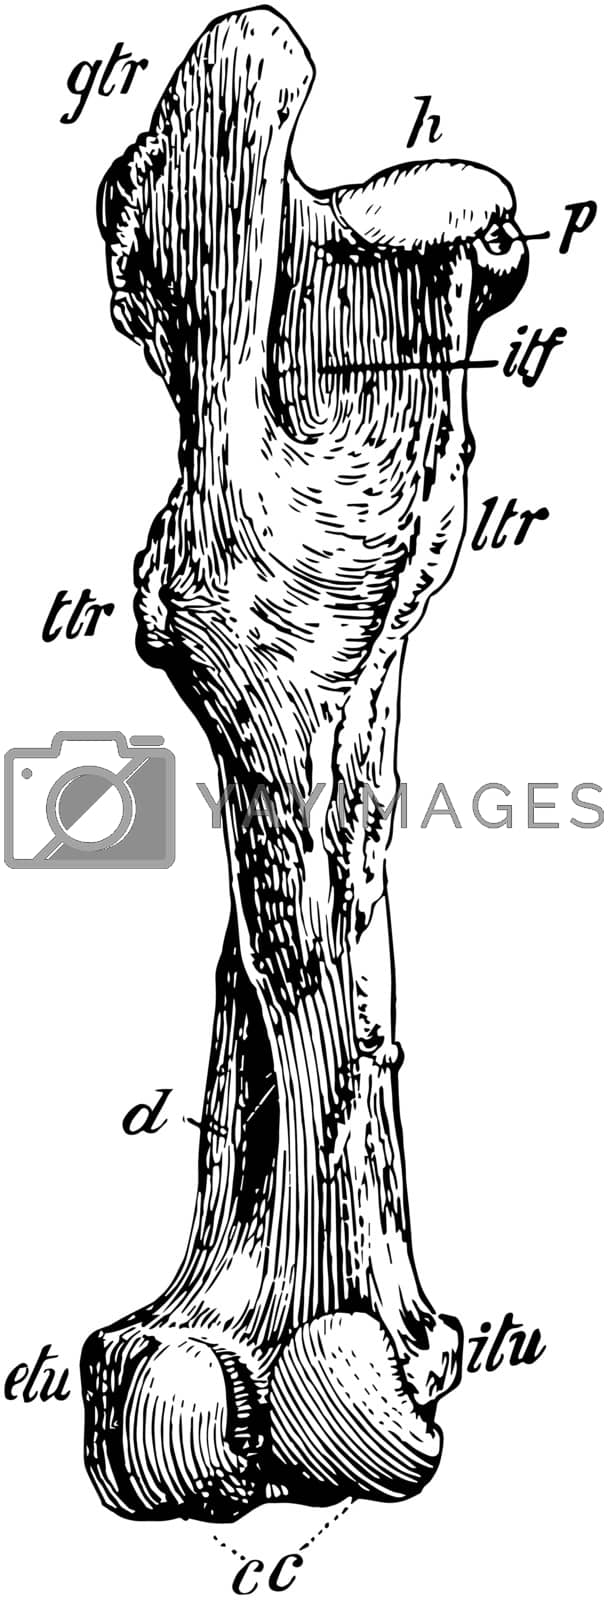 Royalty free image of Posterior View of Left Femur of Horse, vintage illustration. by Morphart